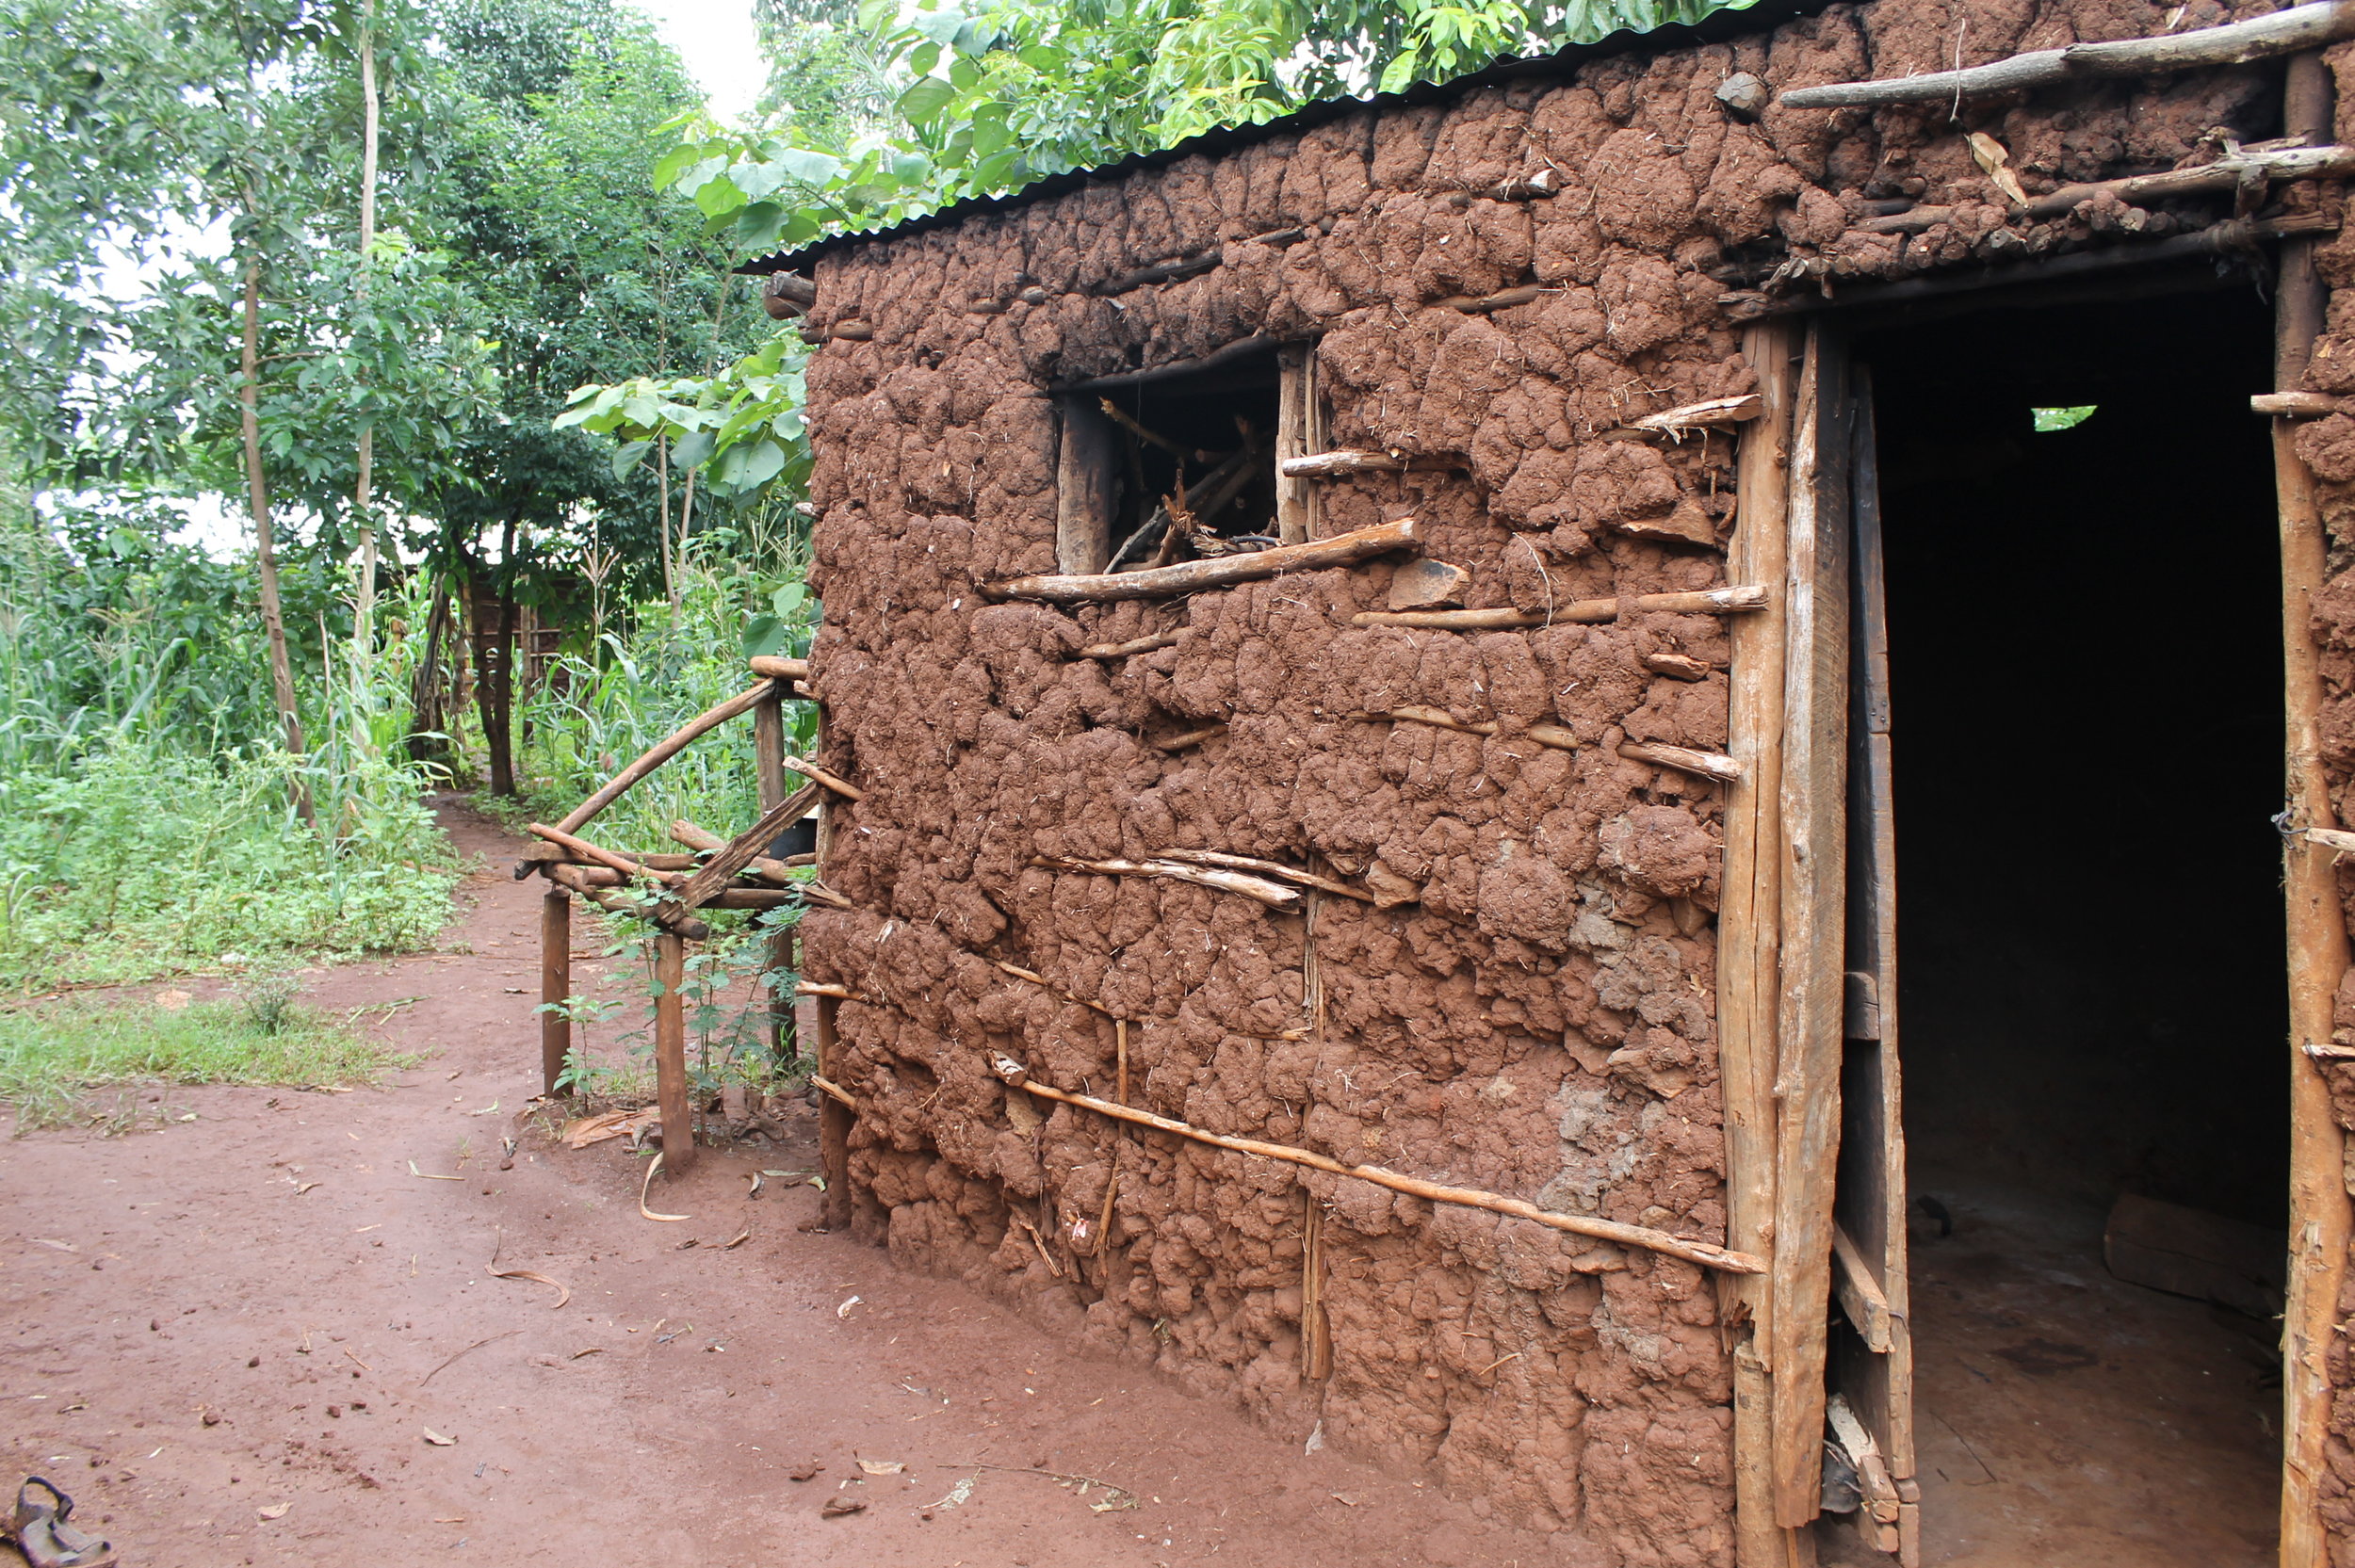  We loved this picture because it shows how much work goes into creating the houses in the Kimilili community. First, a wooden frame must be constructed, and then it must be packed with a mixture of mud and hay. 